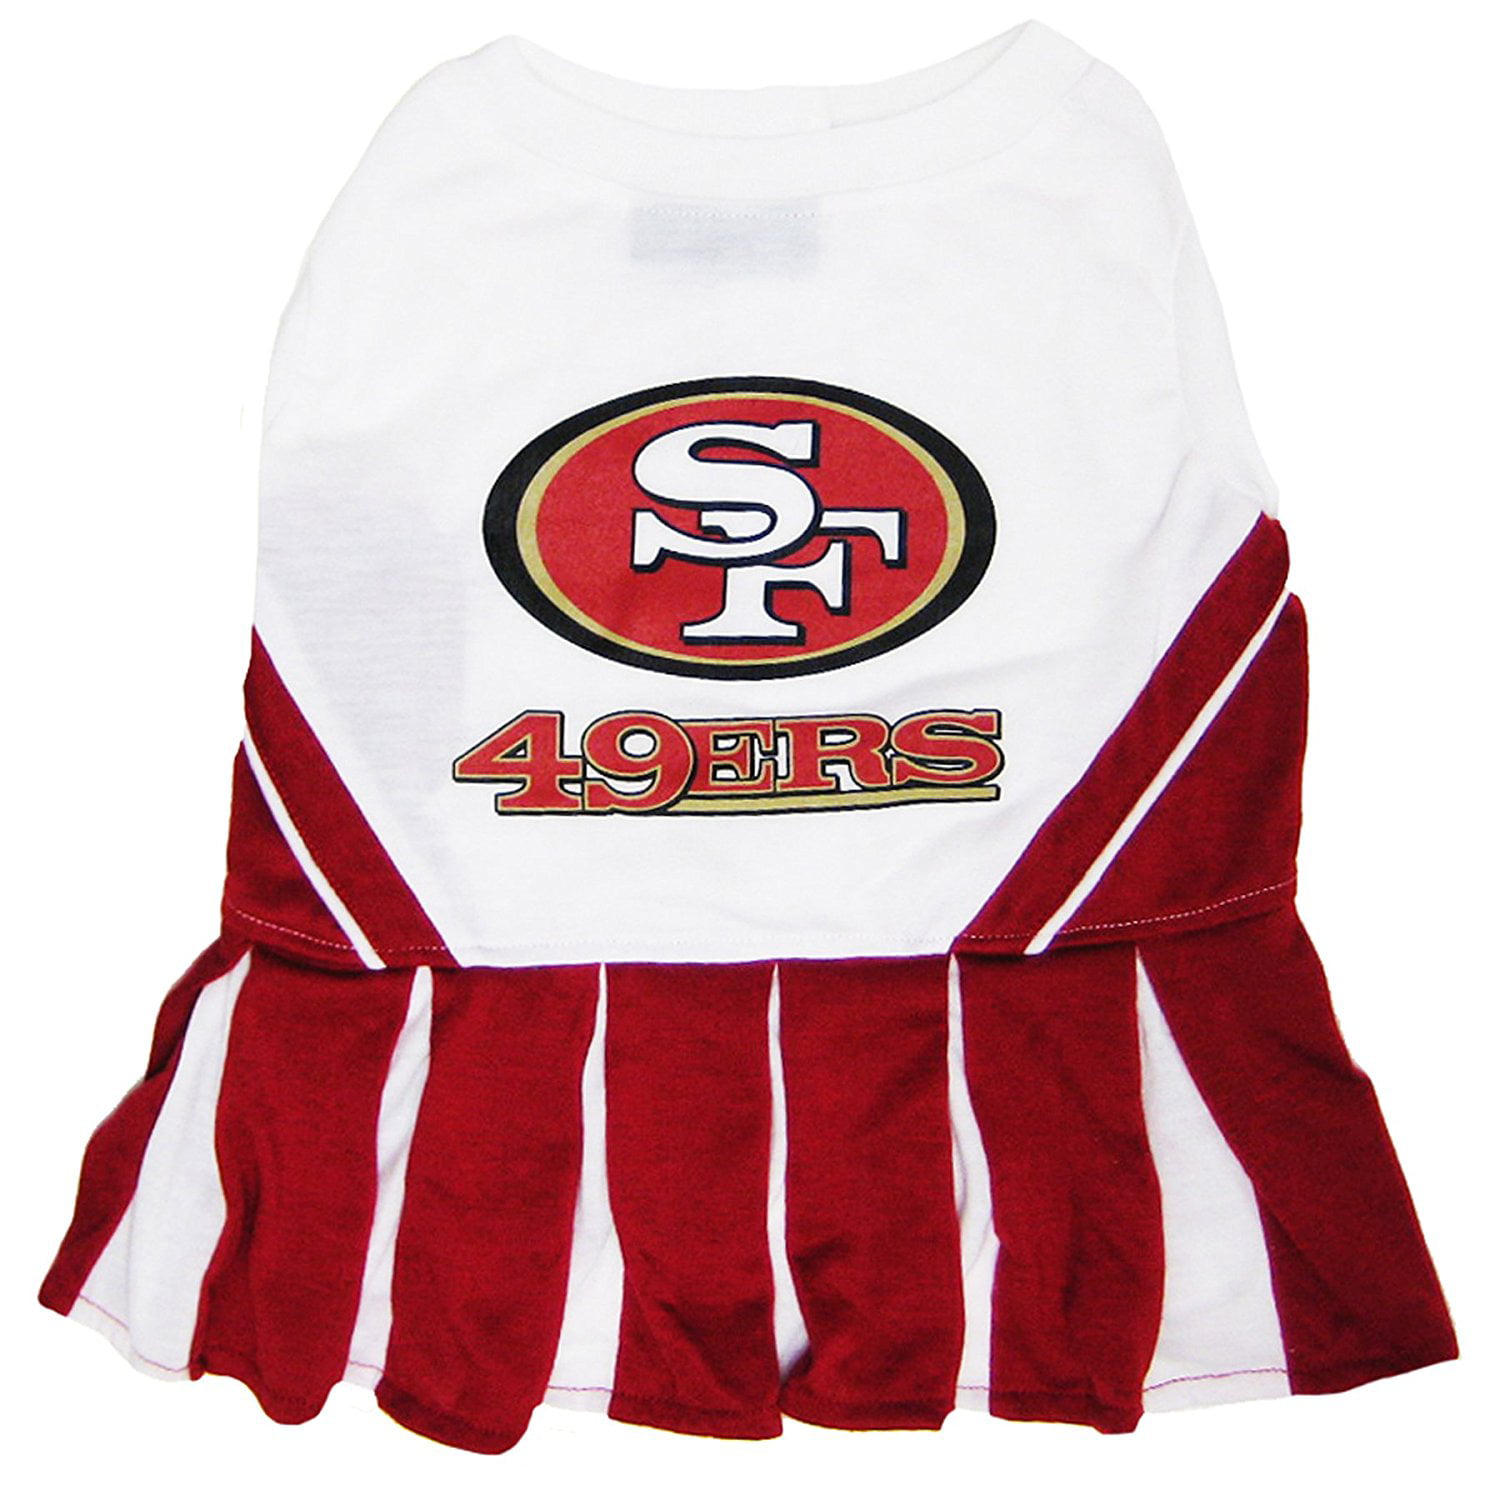  Pets First NFL San Francisco 49ers Jersey, Small